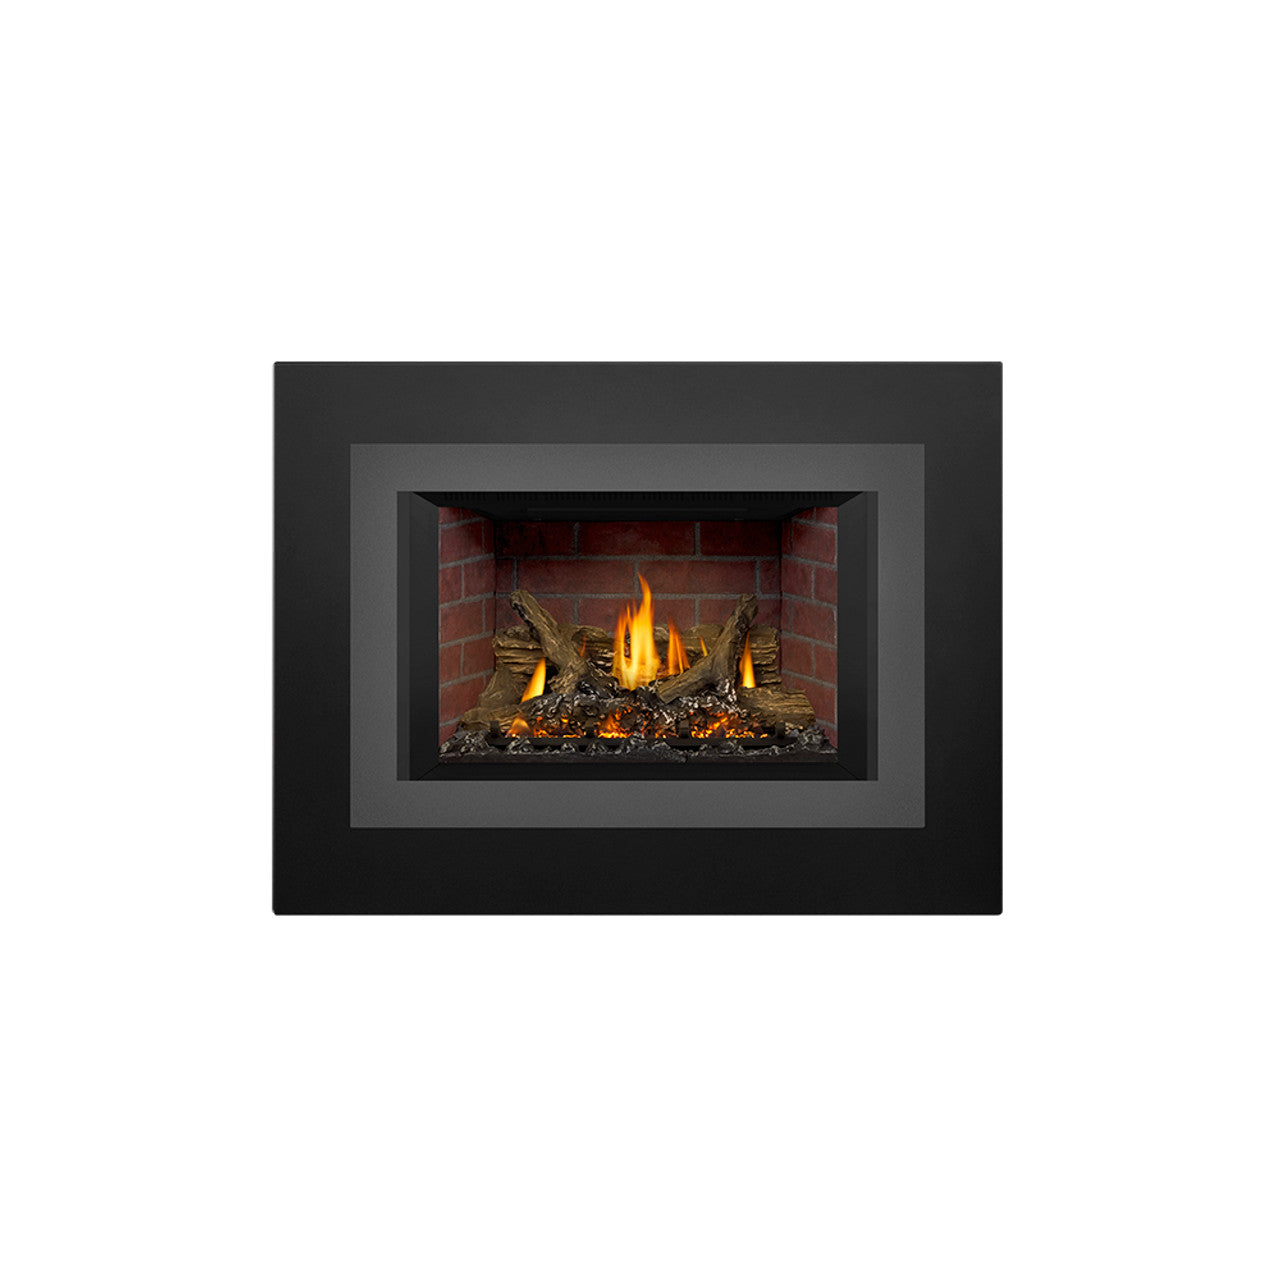 Timberwolf Direct Vent Electronic Ignition Natural Gas Fireplace Insert TDIX3N